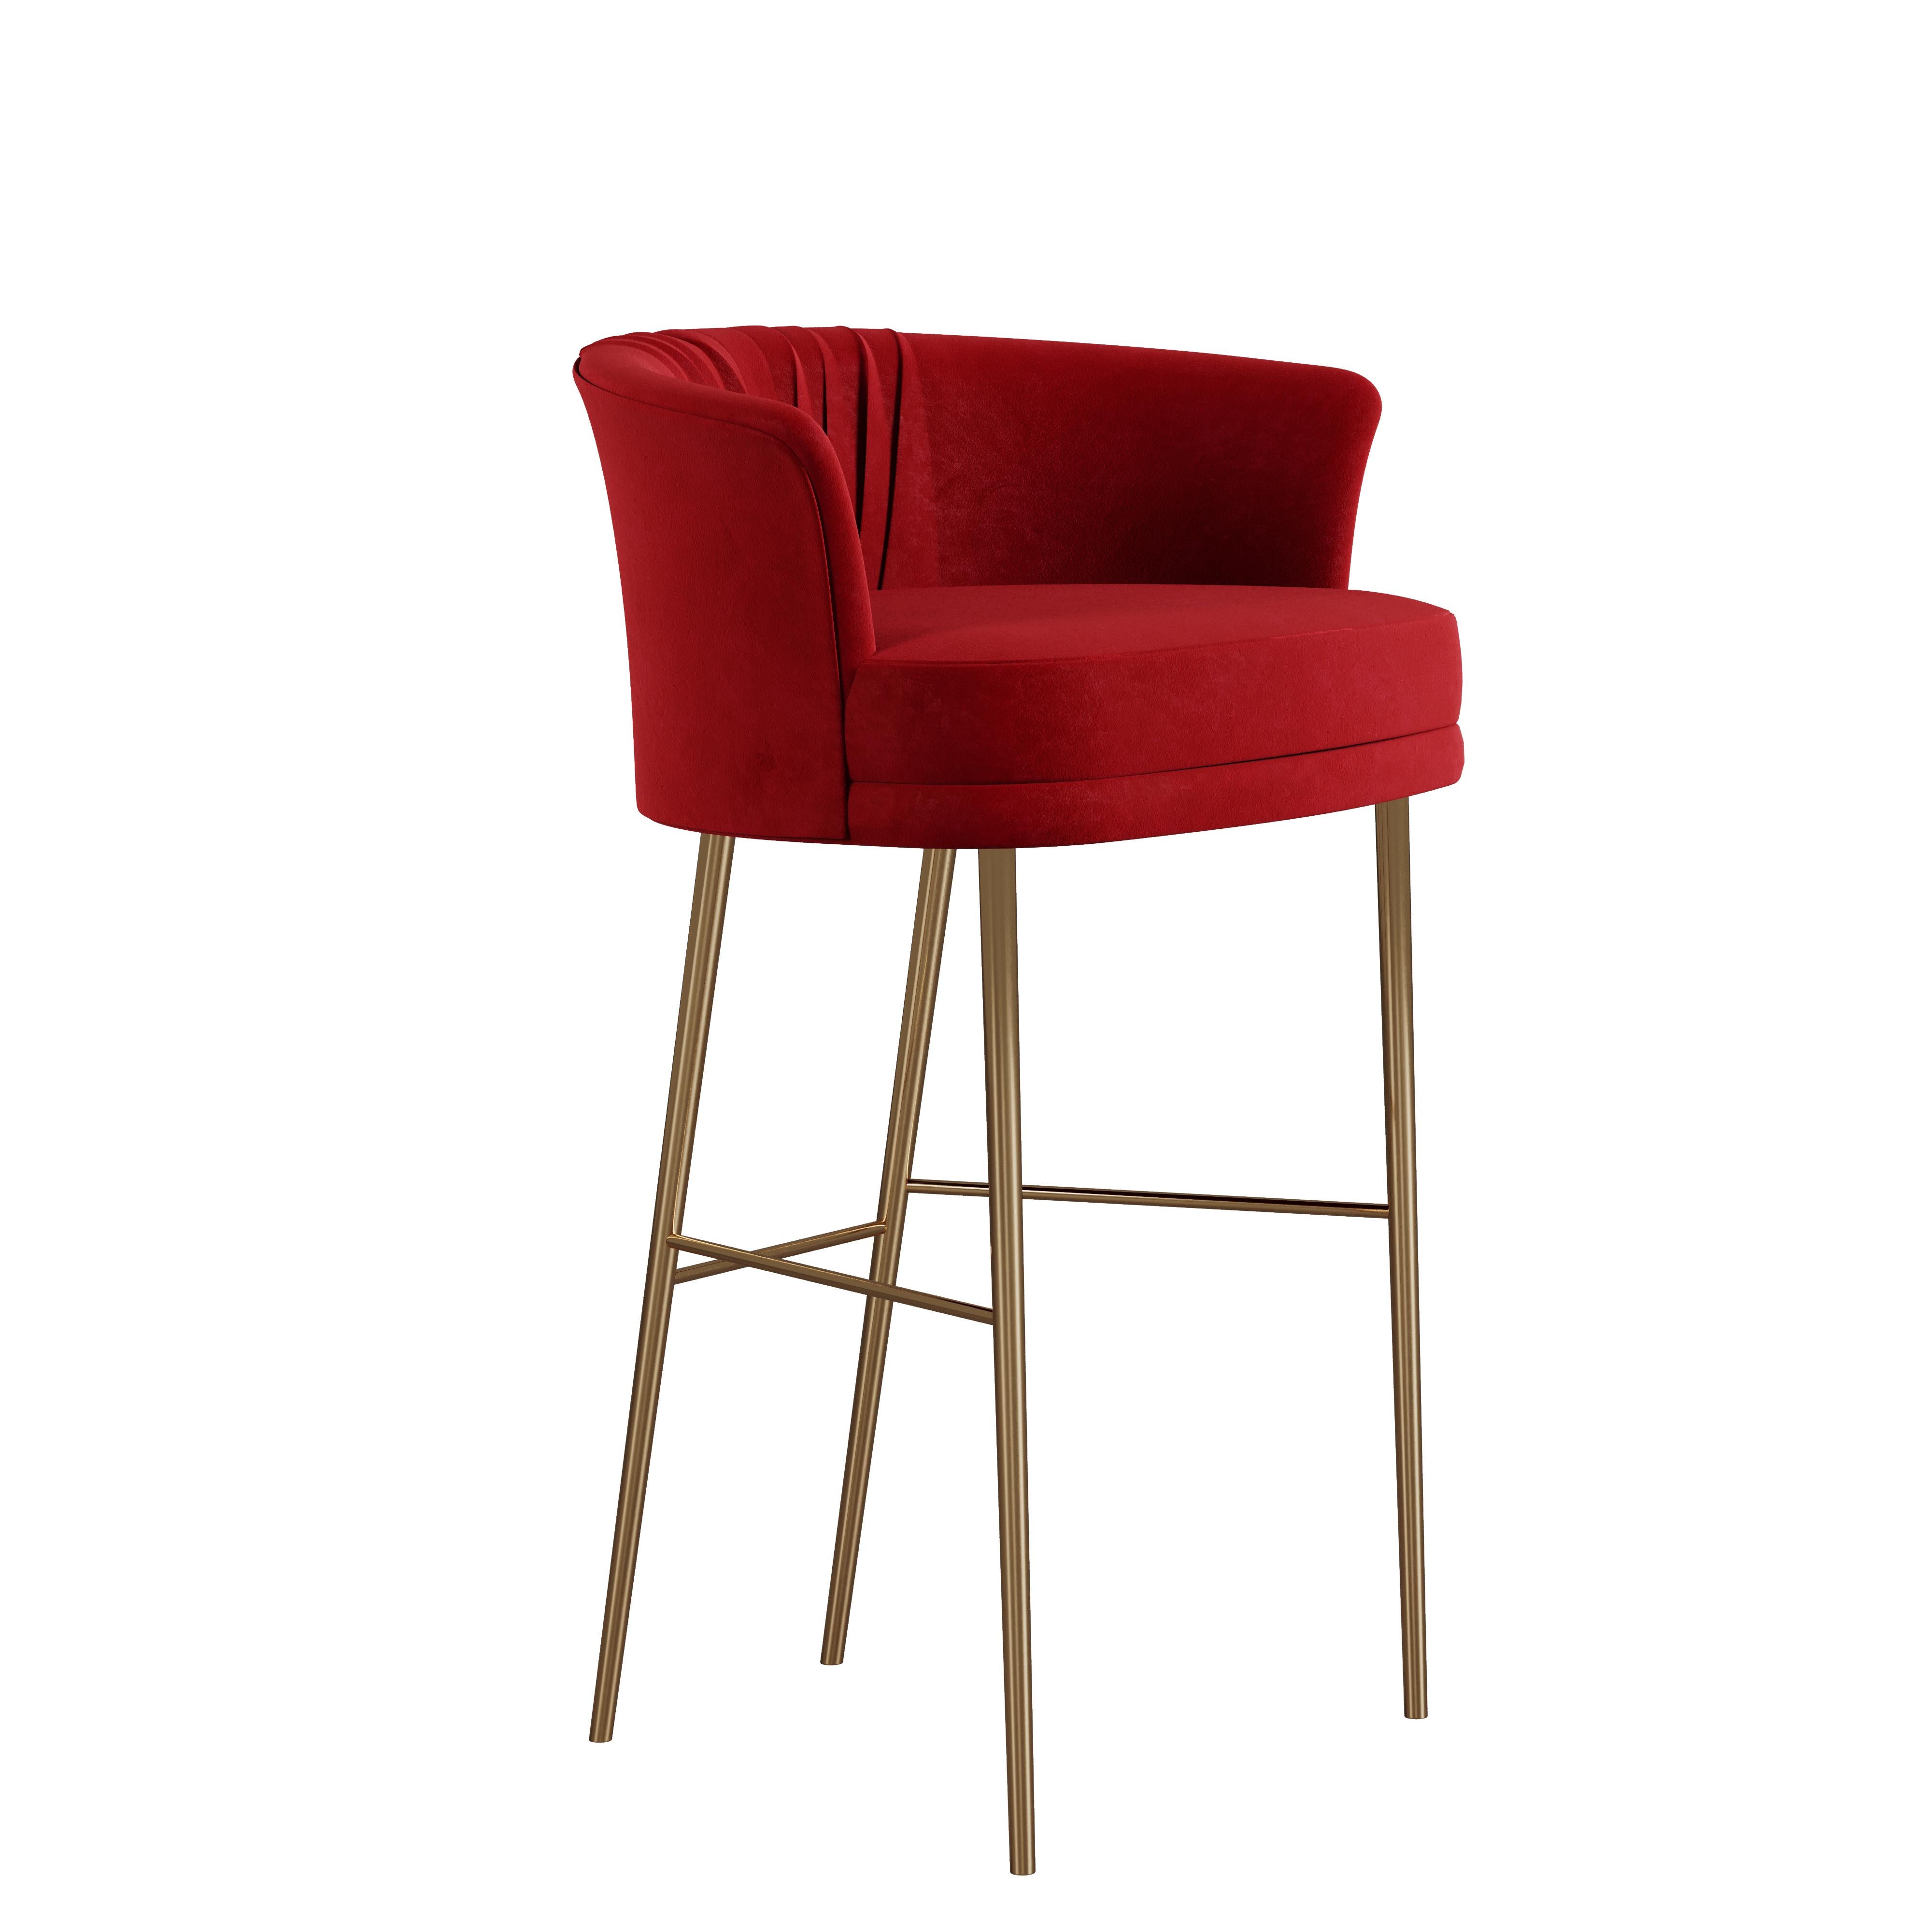 From the Lupino family was born this classic piece, inspired by one of the most independent women from the Hollywood golden era. With Ida Lupino's beauty and quotes in mind, Ottiu created the Lupino Mid-Century Modern Bar Chair. With polished gold